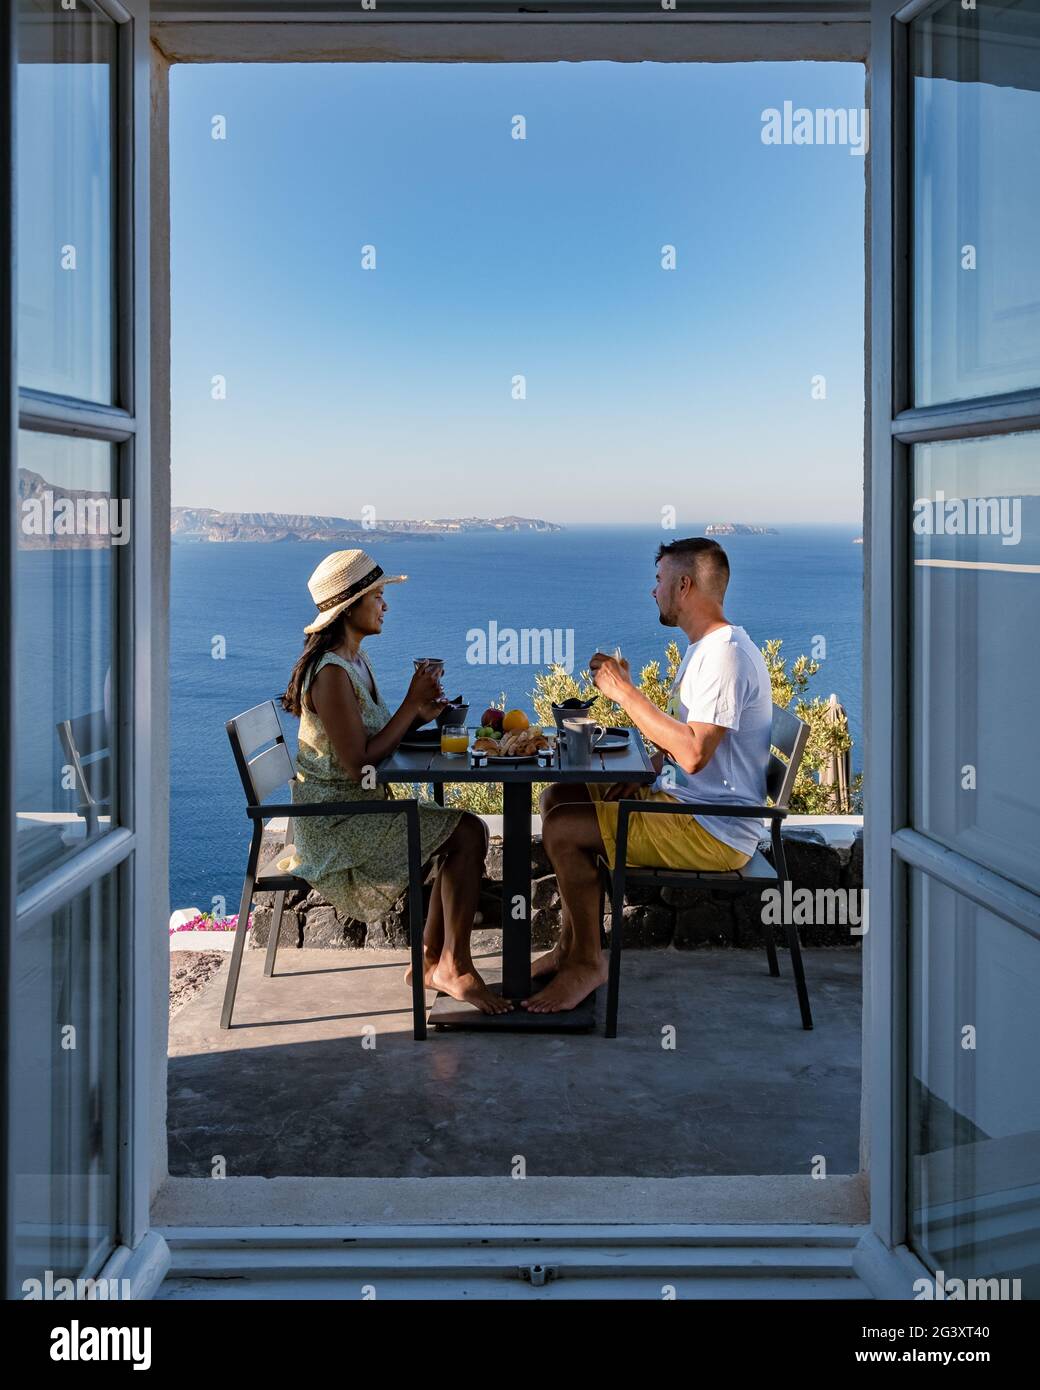 Santorini Greece, young couple mid age European and Asian on vacation at the Greek village of Oia Santorini Greece, luxury vacat Stock Photo